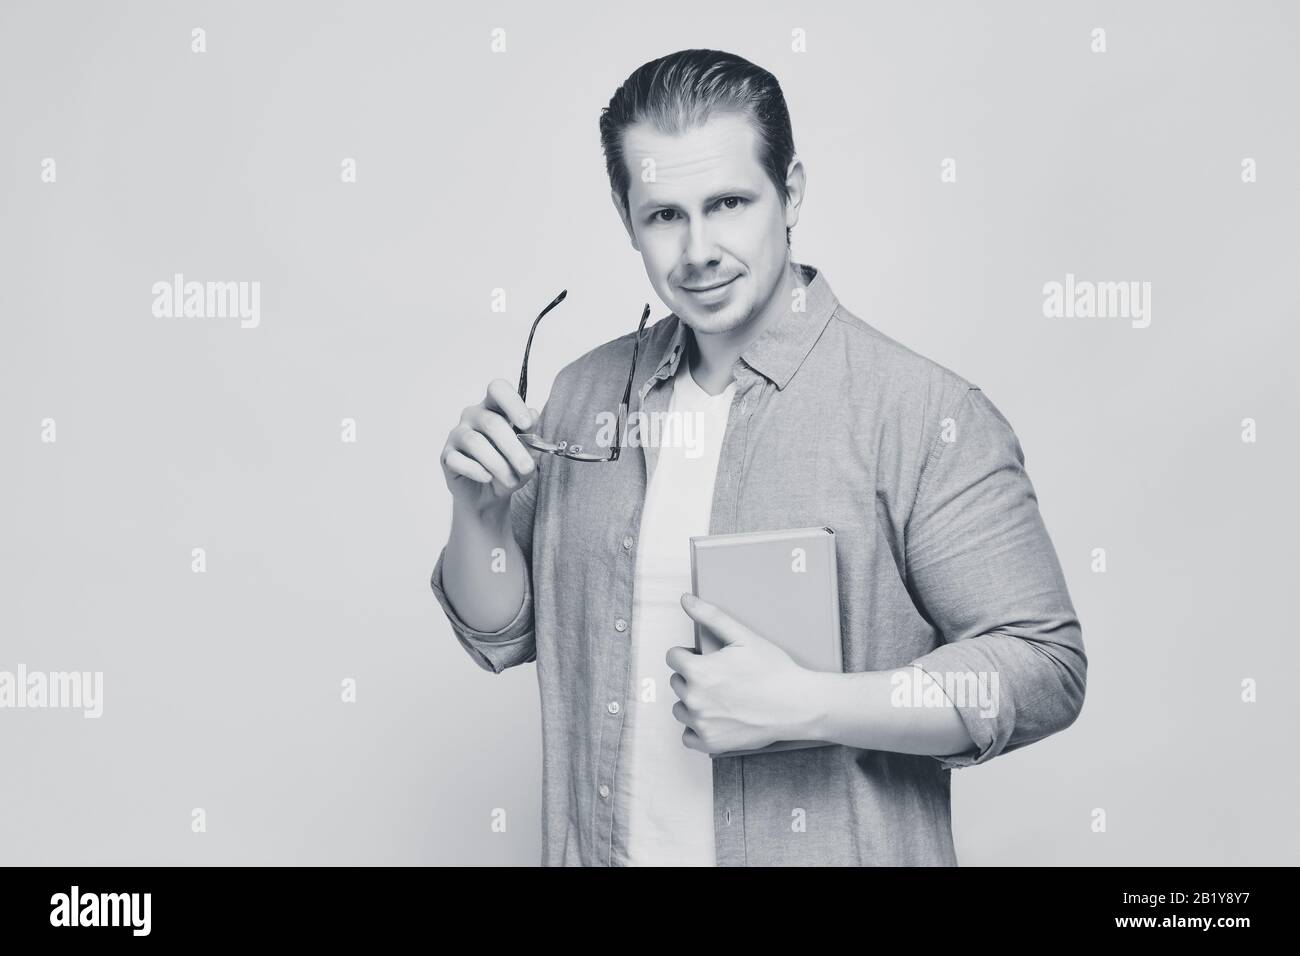 A man in a shirt on a yellow background holds a book while taking off his glasses and looks at the camera. Black and white. Close up. Stock Photo